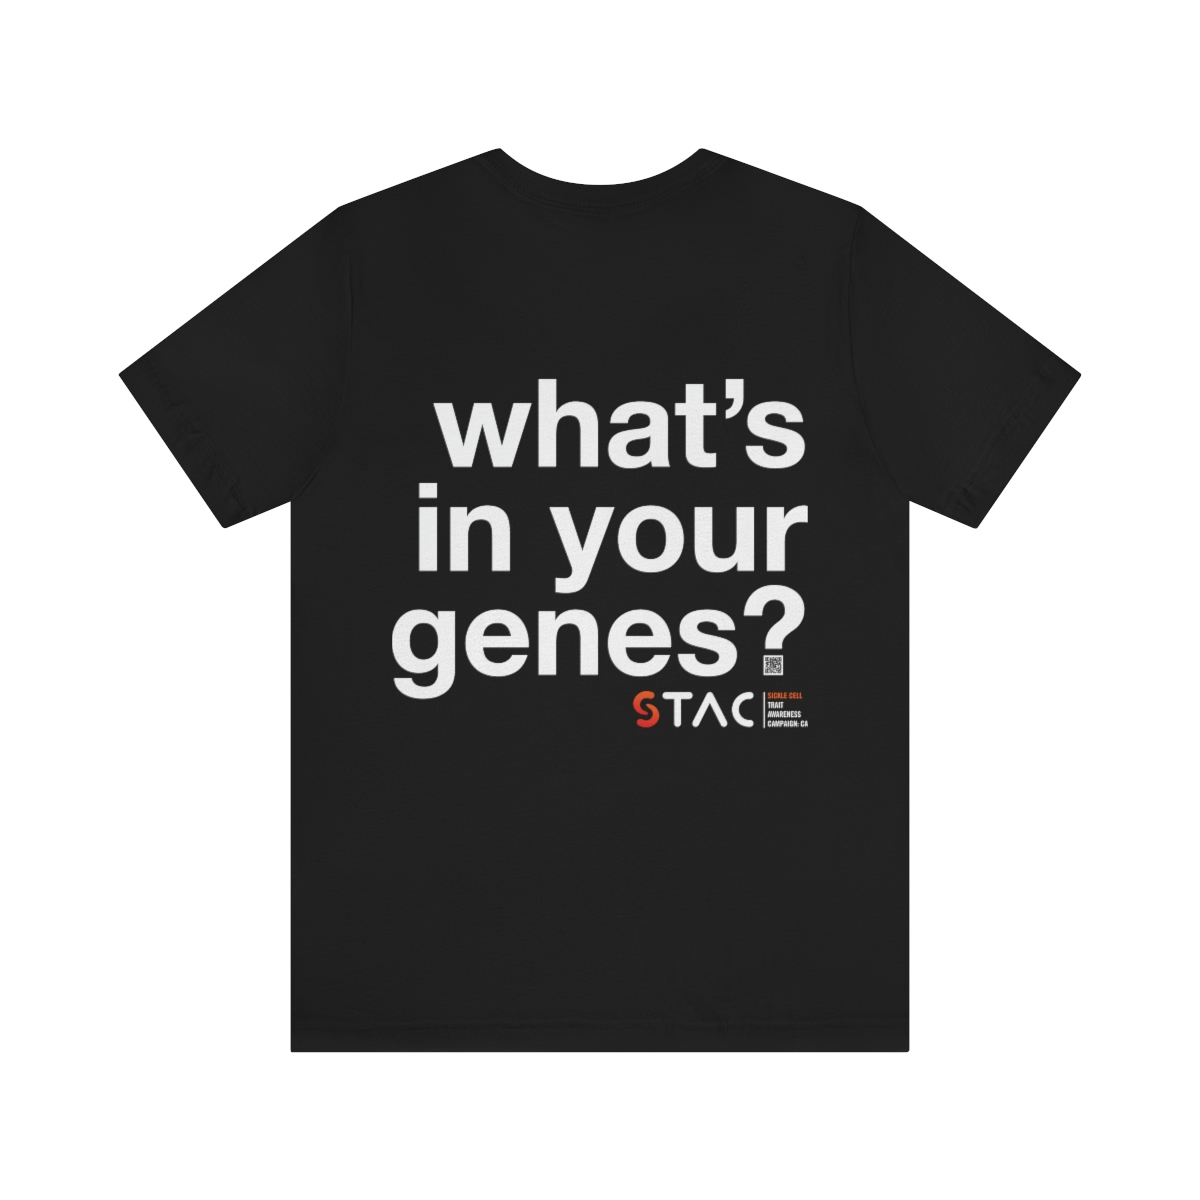 Rear view of a black t-shirt, reading "what's in your genes?" on three large lines of text spanning the back. The STAC logo sits beneath this text, anchored to the right.